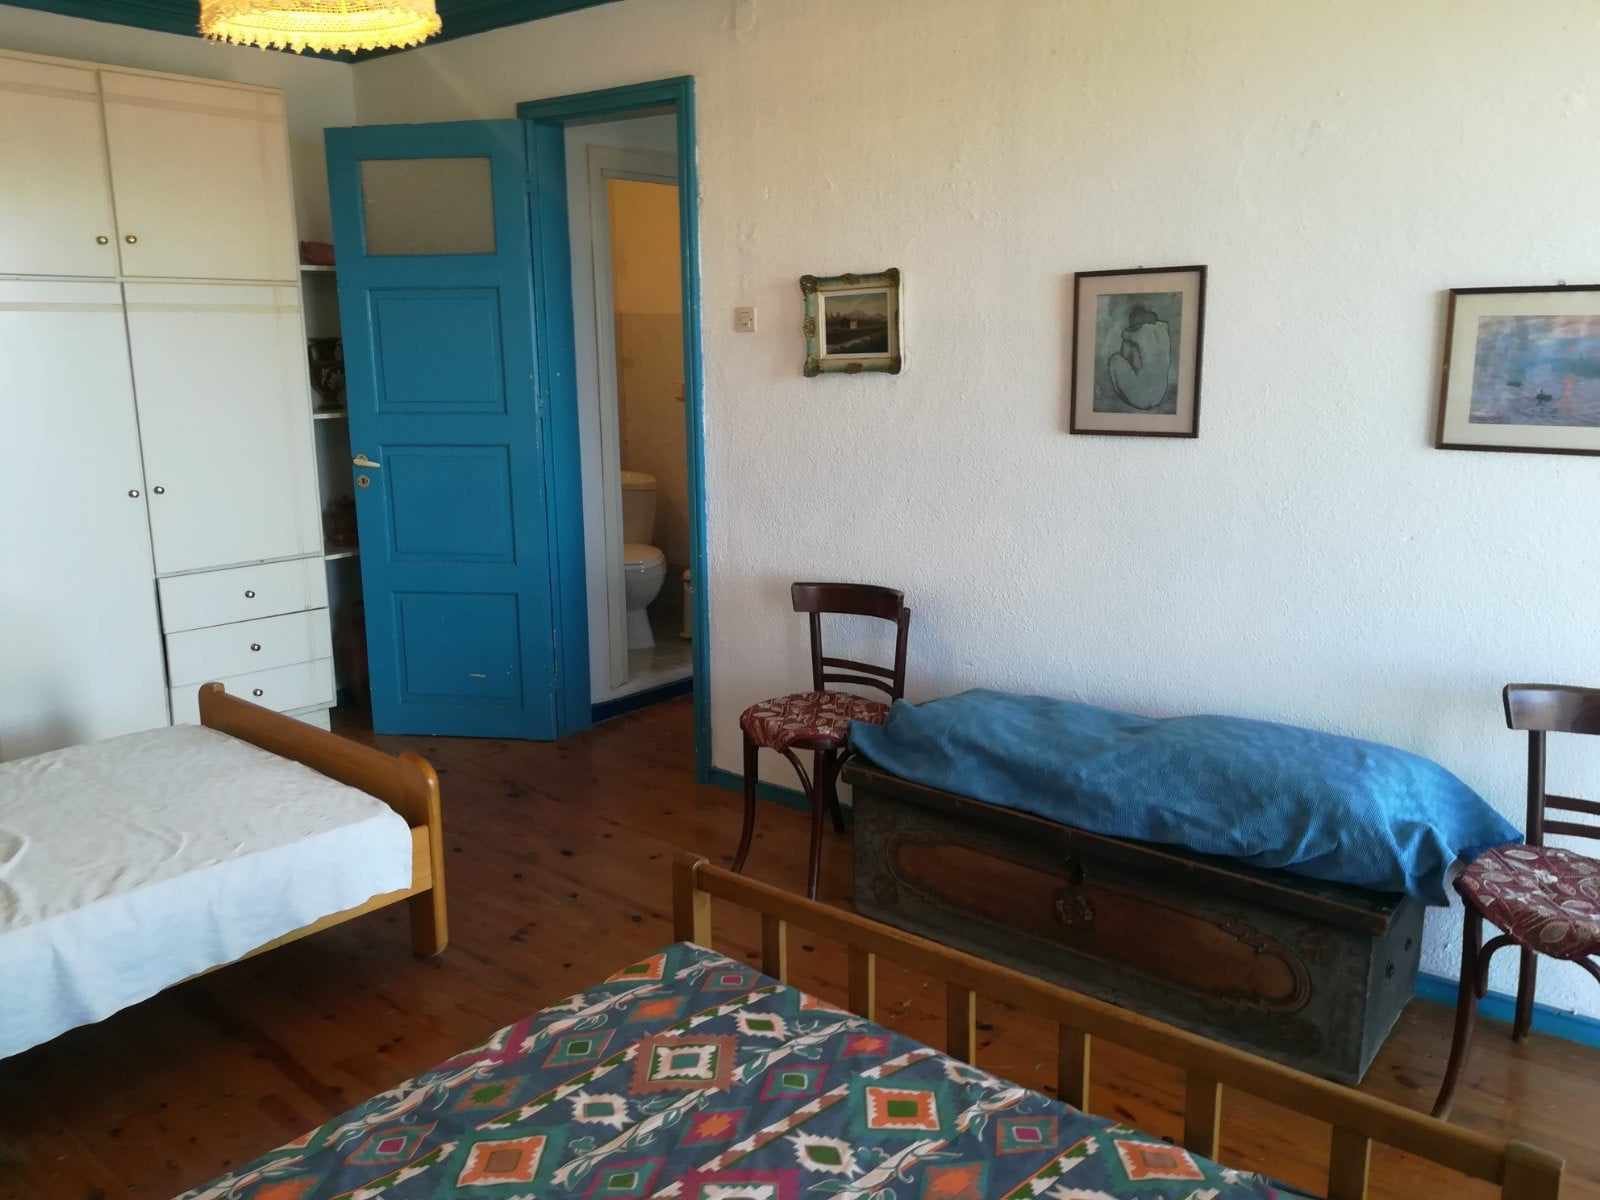 Traditional_house in_Glossa_with_a sea_view_bed.jpg